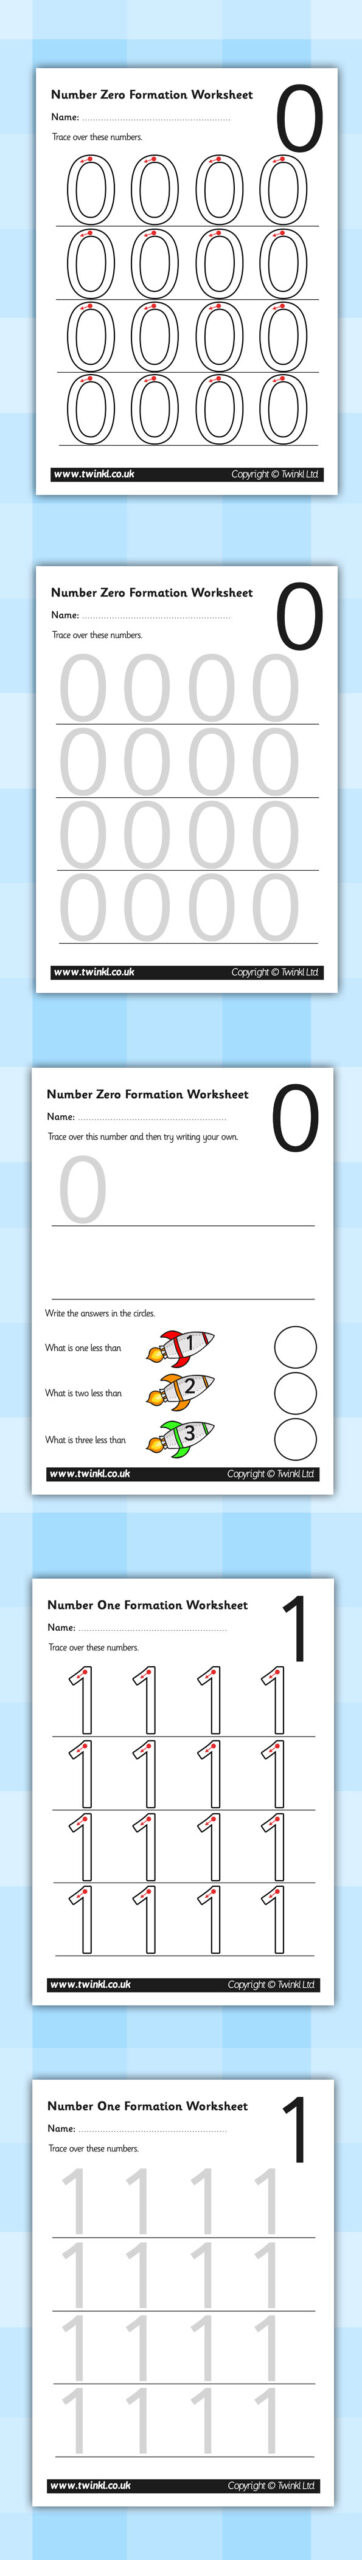 Twinkl Resources &amp;gt;&amp;gt; Number Formation Worksheets &amp;gt;&amp;gt; Printable throughout Name Tracing Twinkl